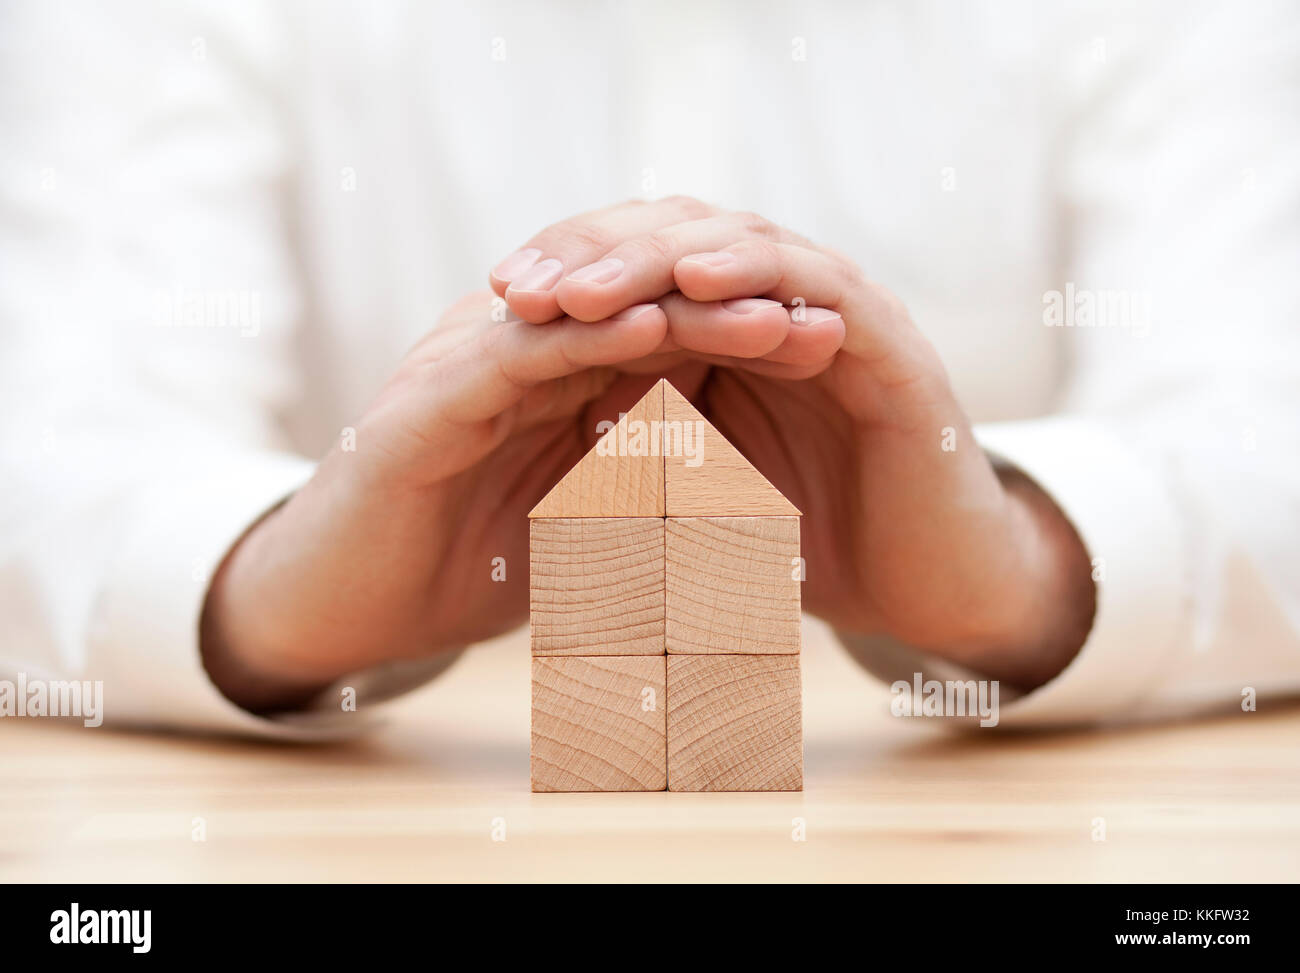 Wooden block house protected by hands Stock Photo